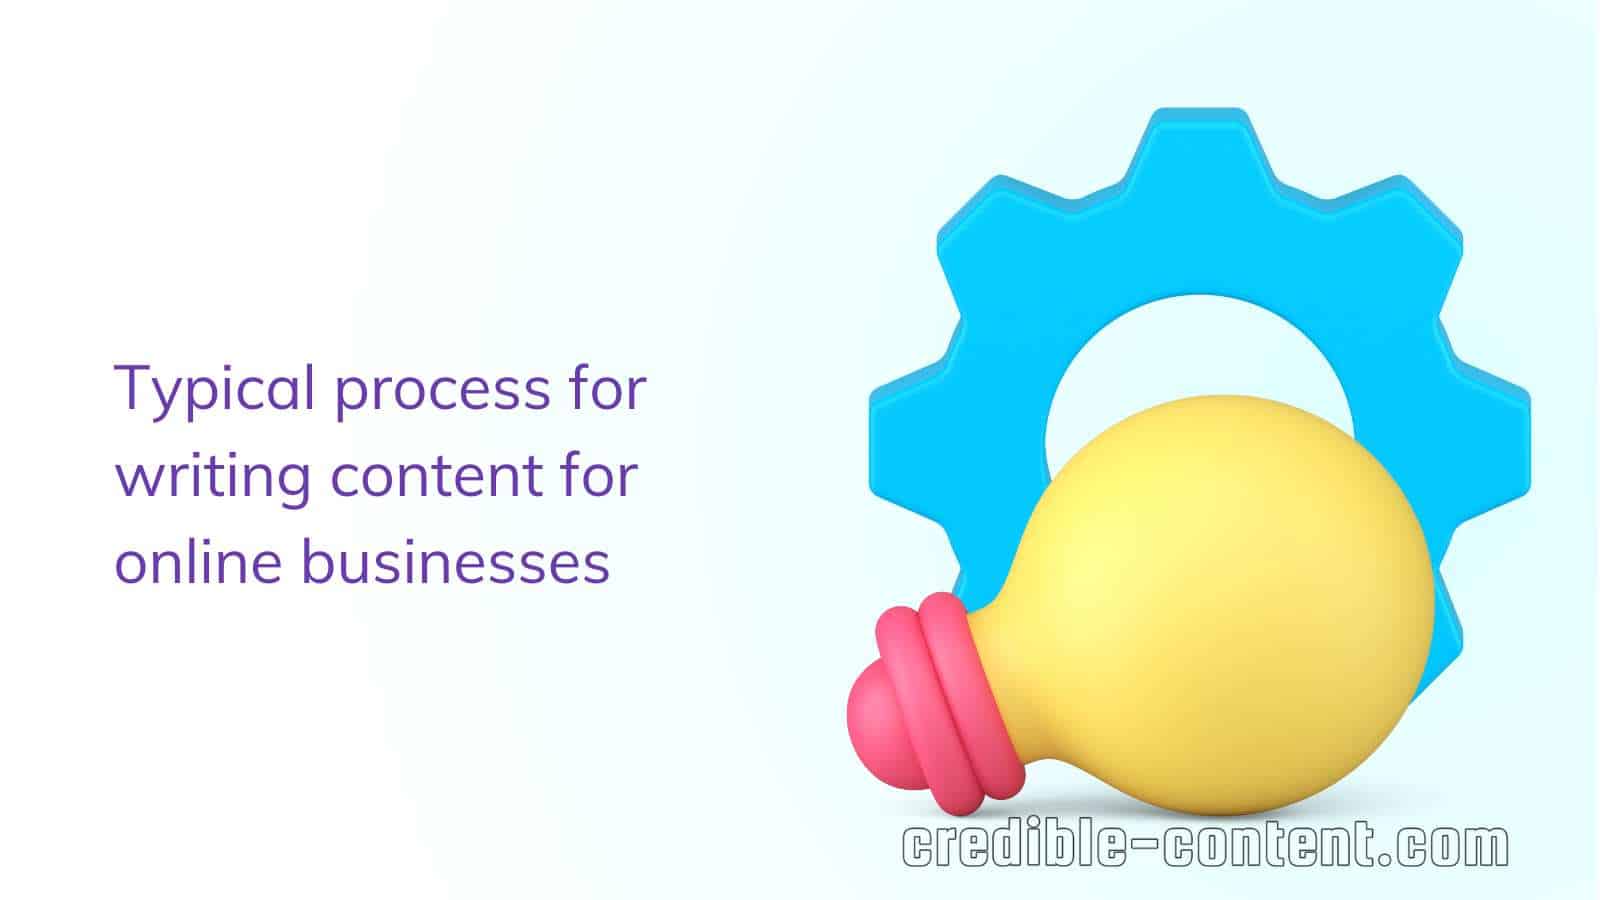 Typical process for writing content for online businesses